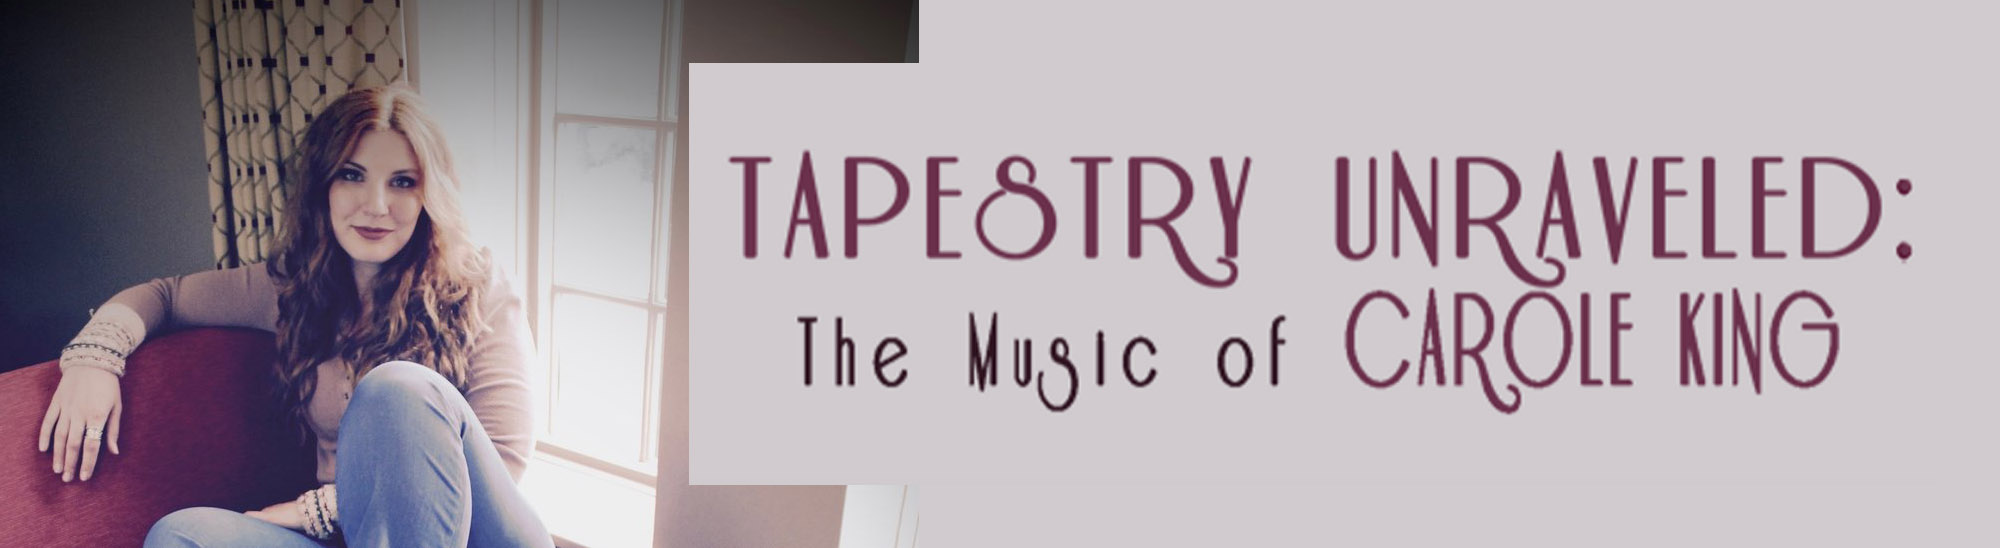 tapestry-unraveled-the-music-of-carole-king